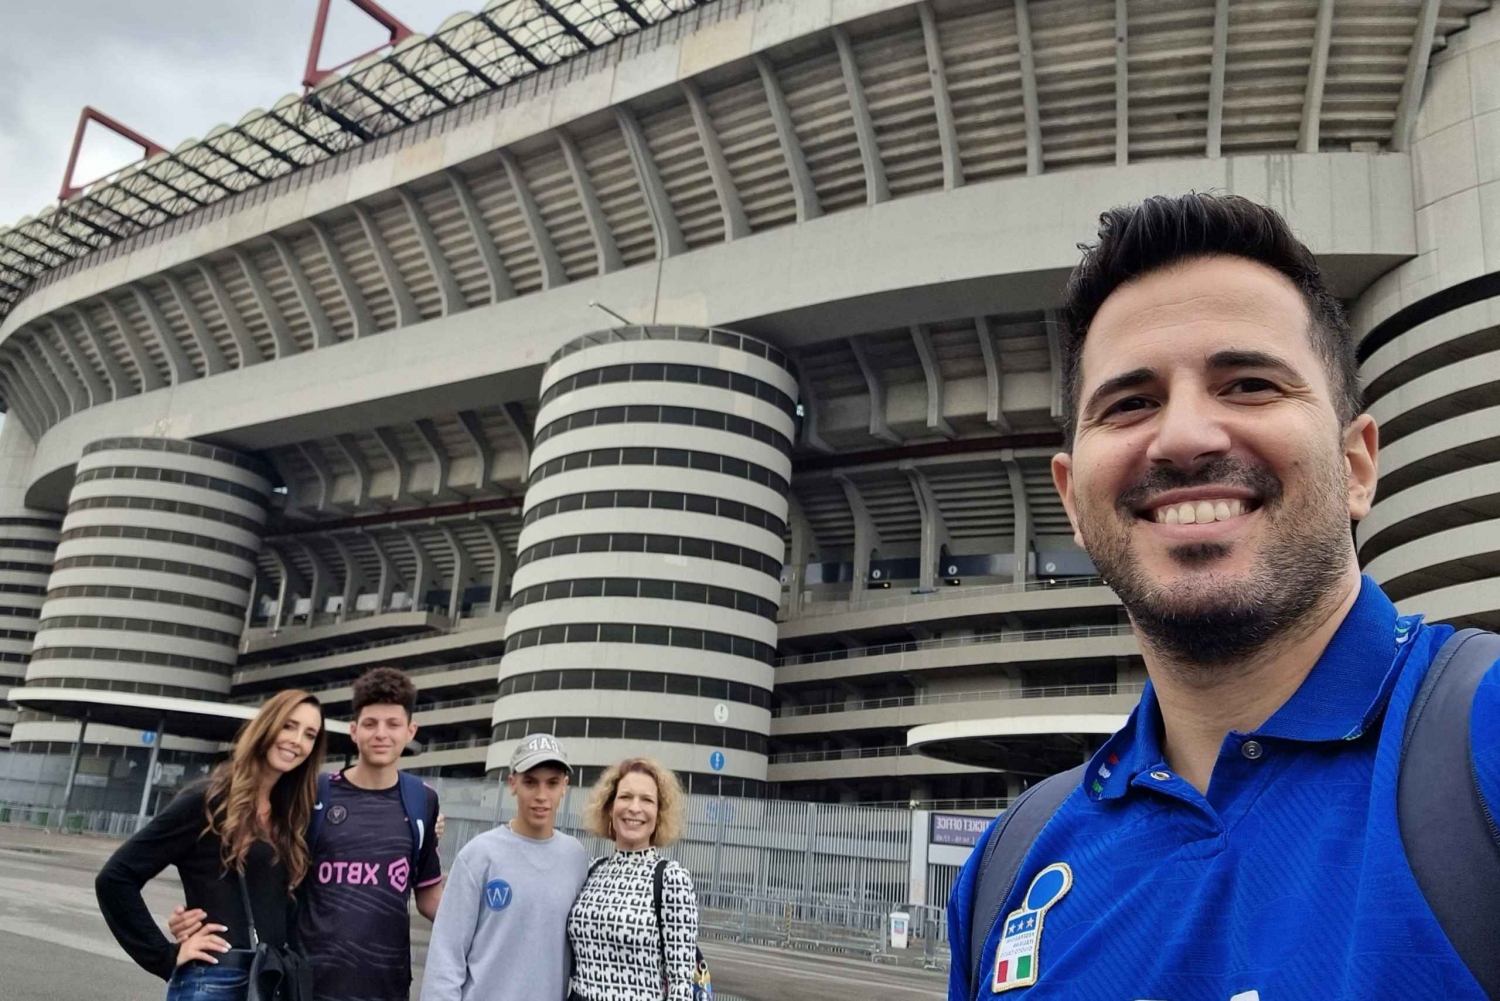 Milan Football Tour - Experience the City of Football